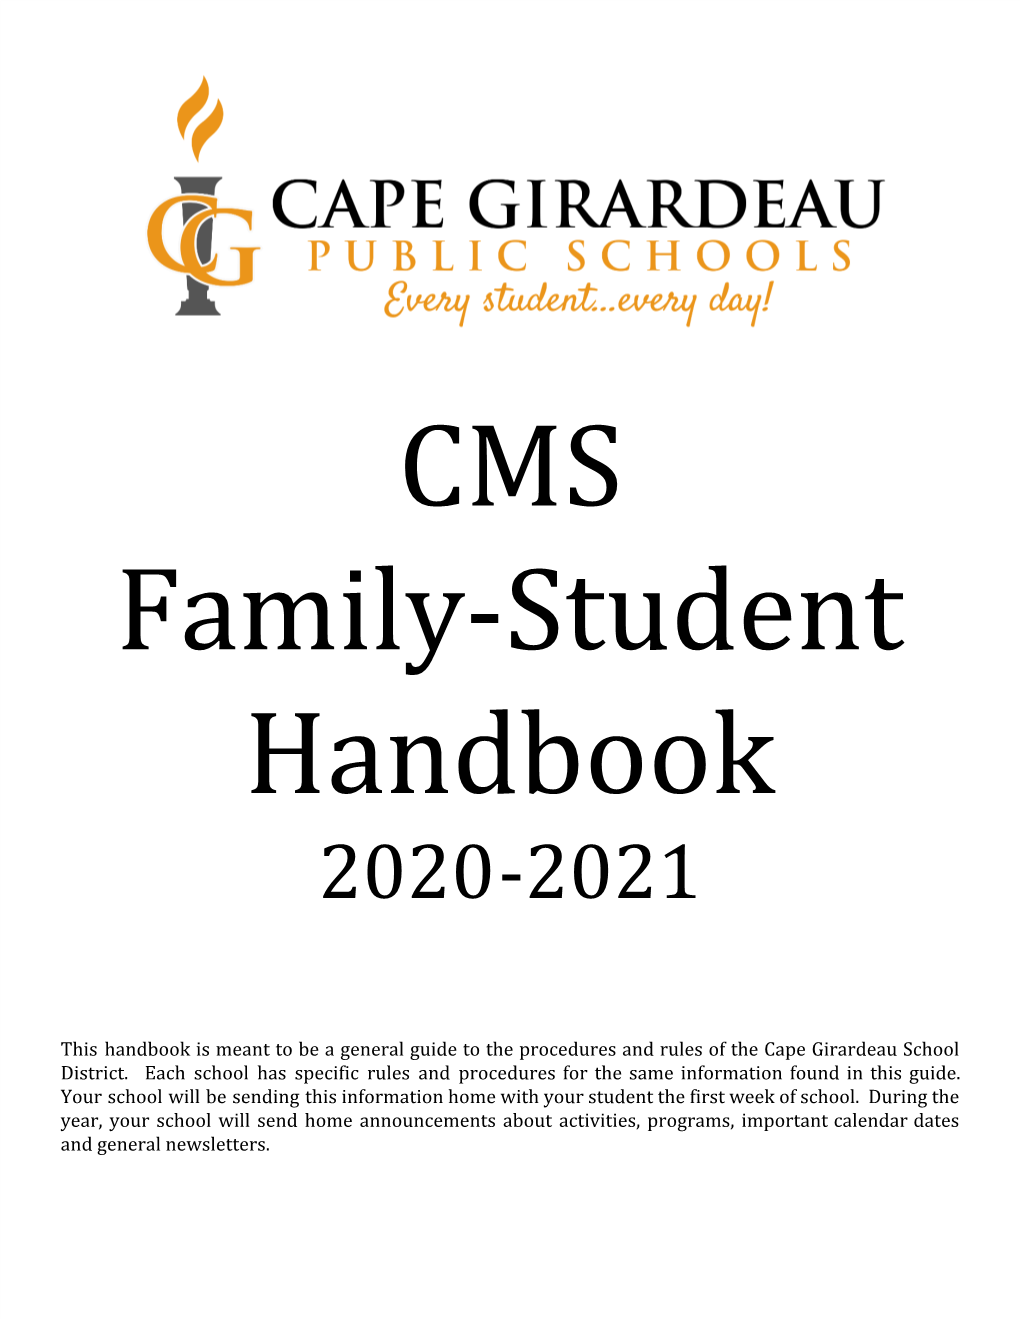 This Handbook Is Meant to Be a General Guide to the Procedures and Rules of the Cape Girardeau School District